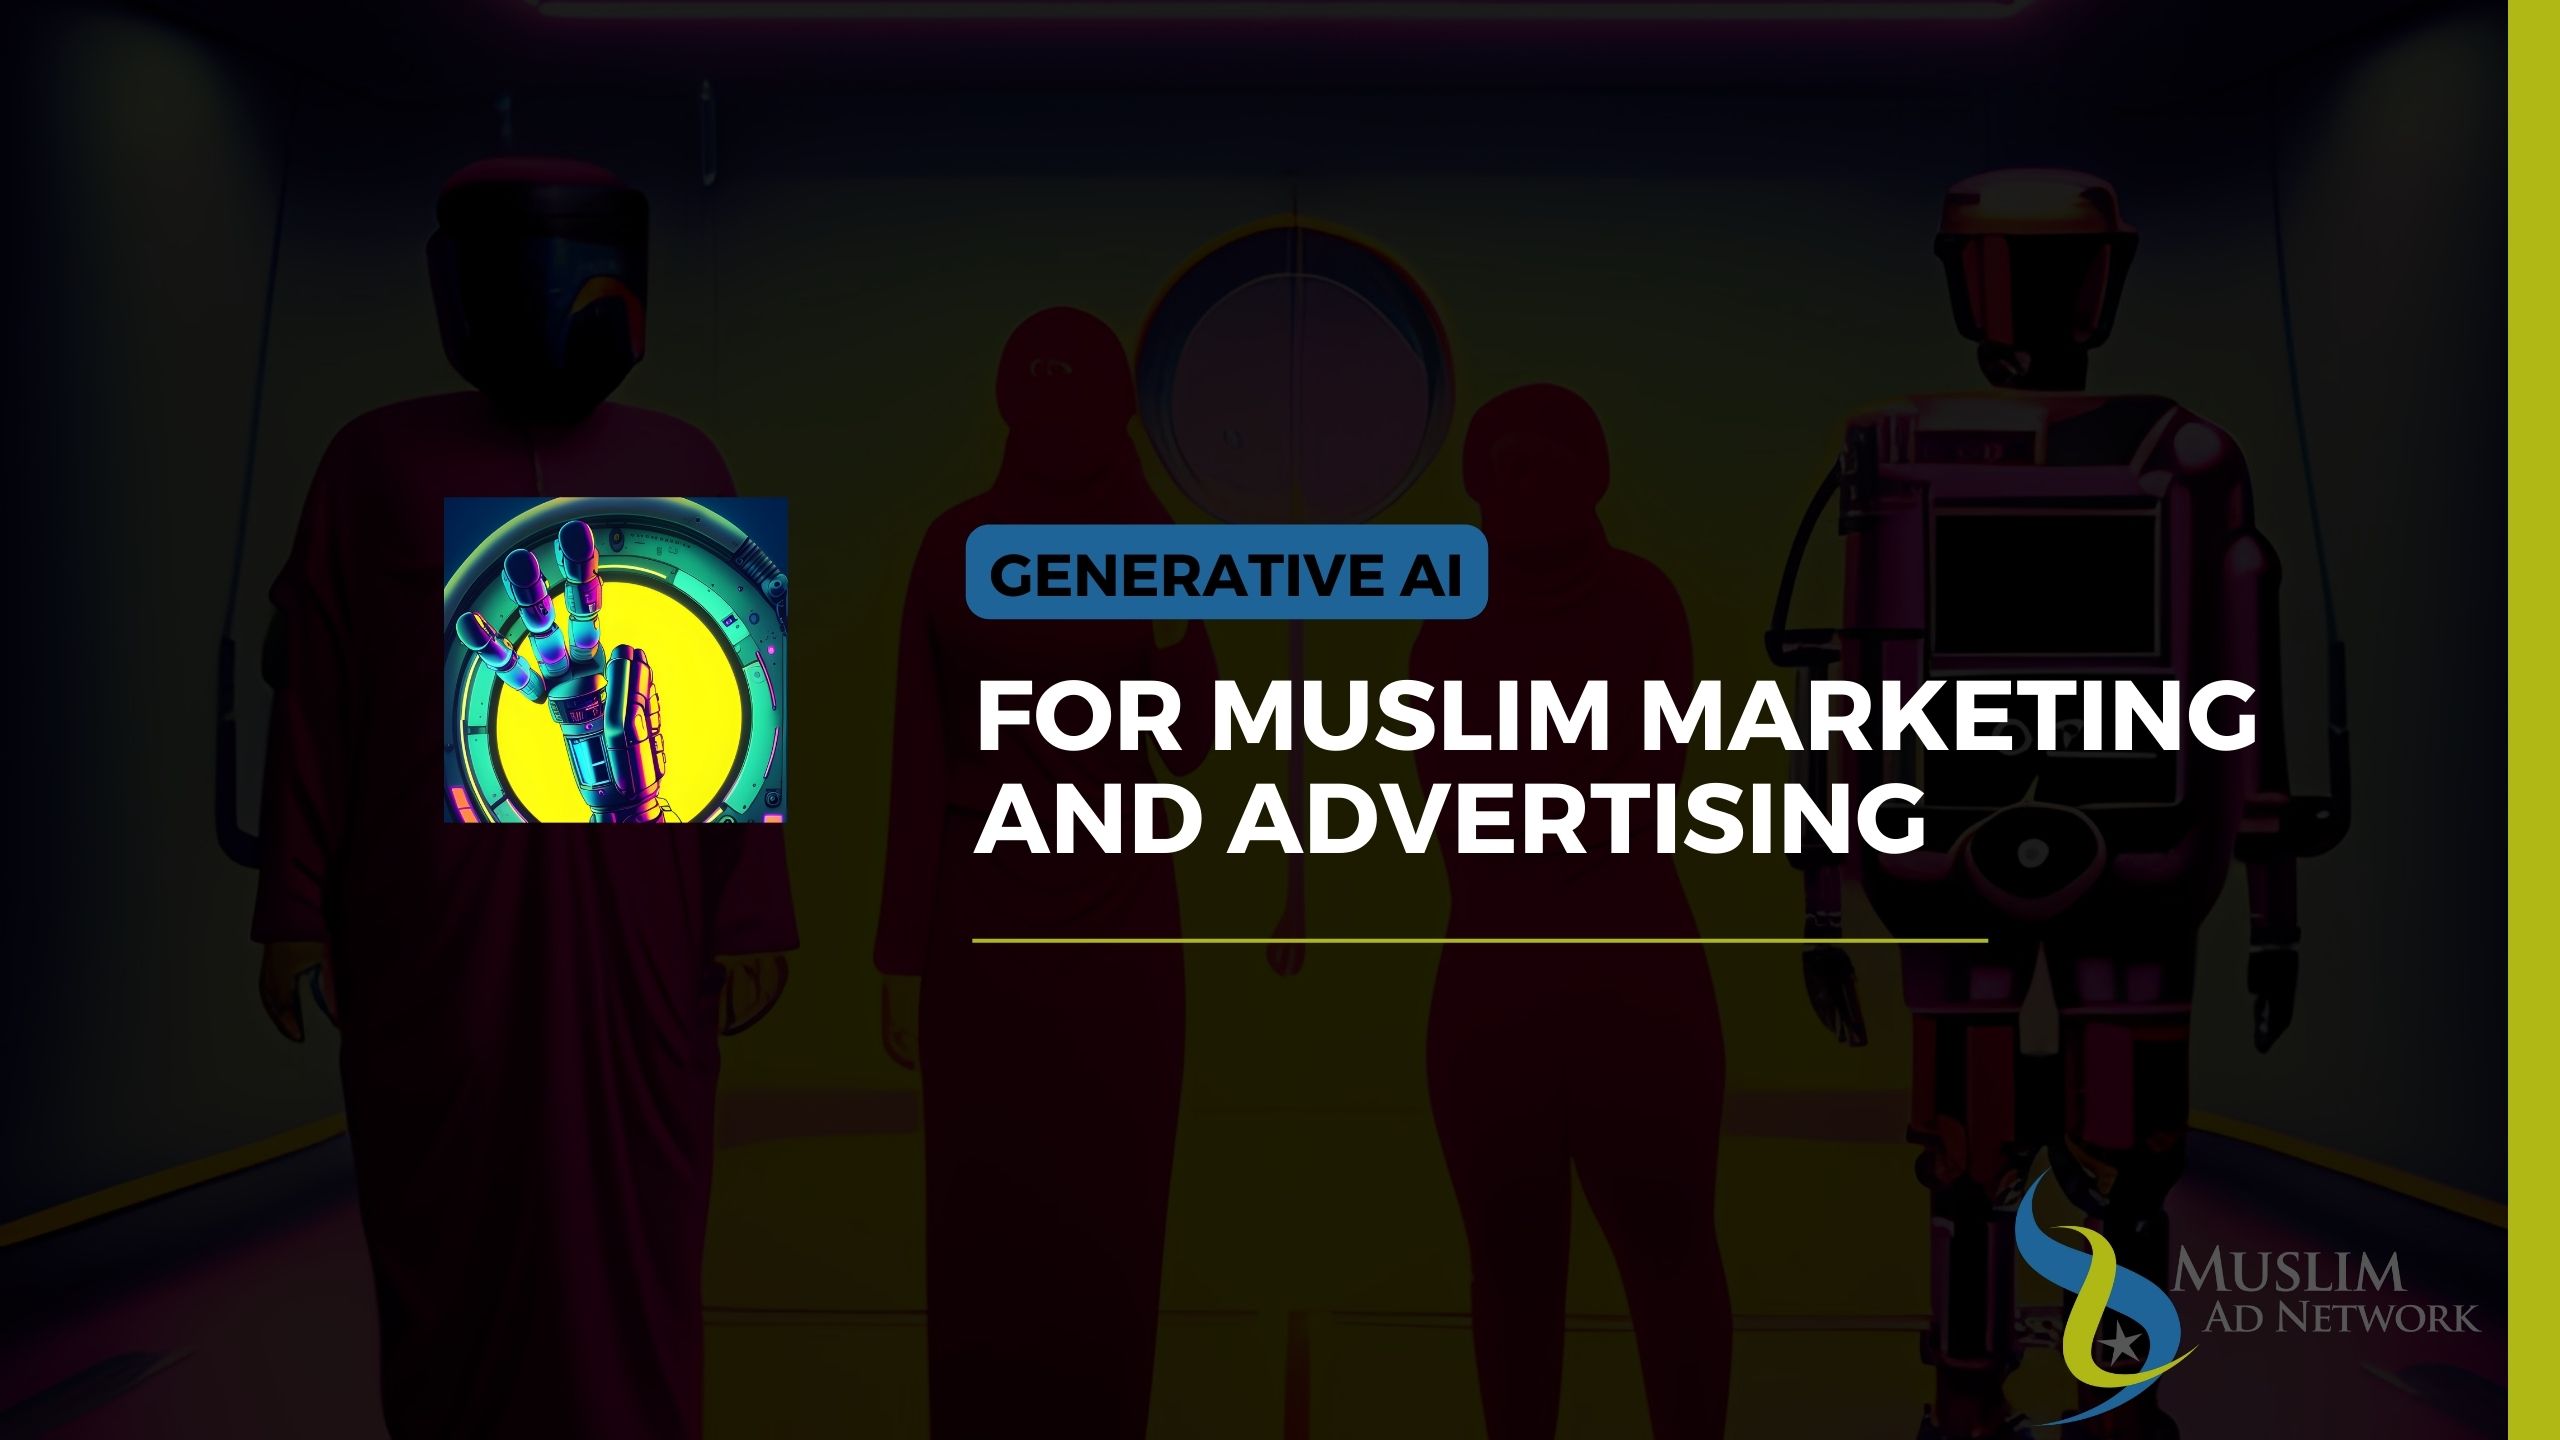 Generative AI for Muslim Marketing and Advertising